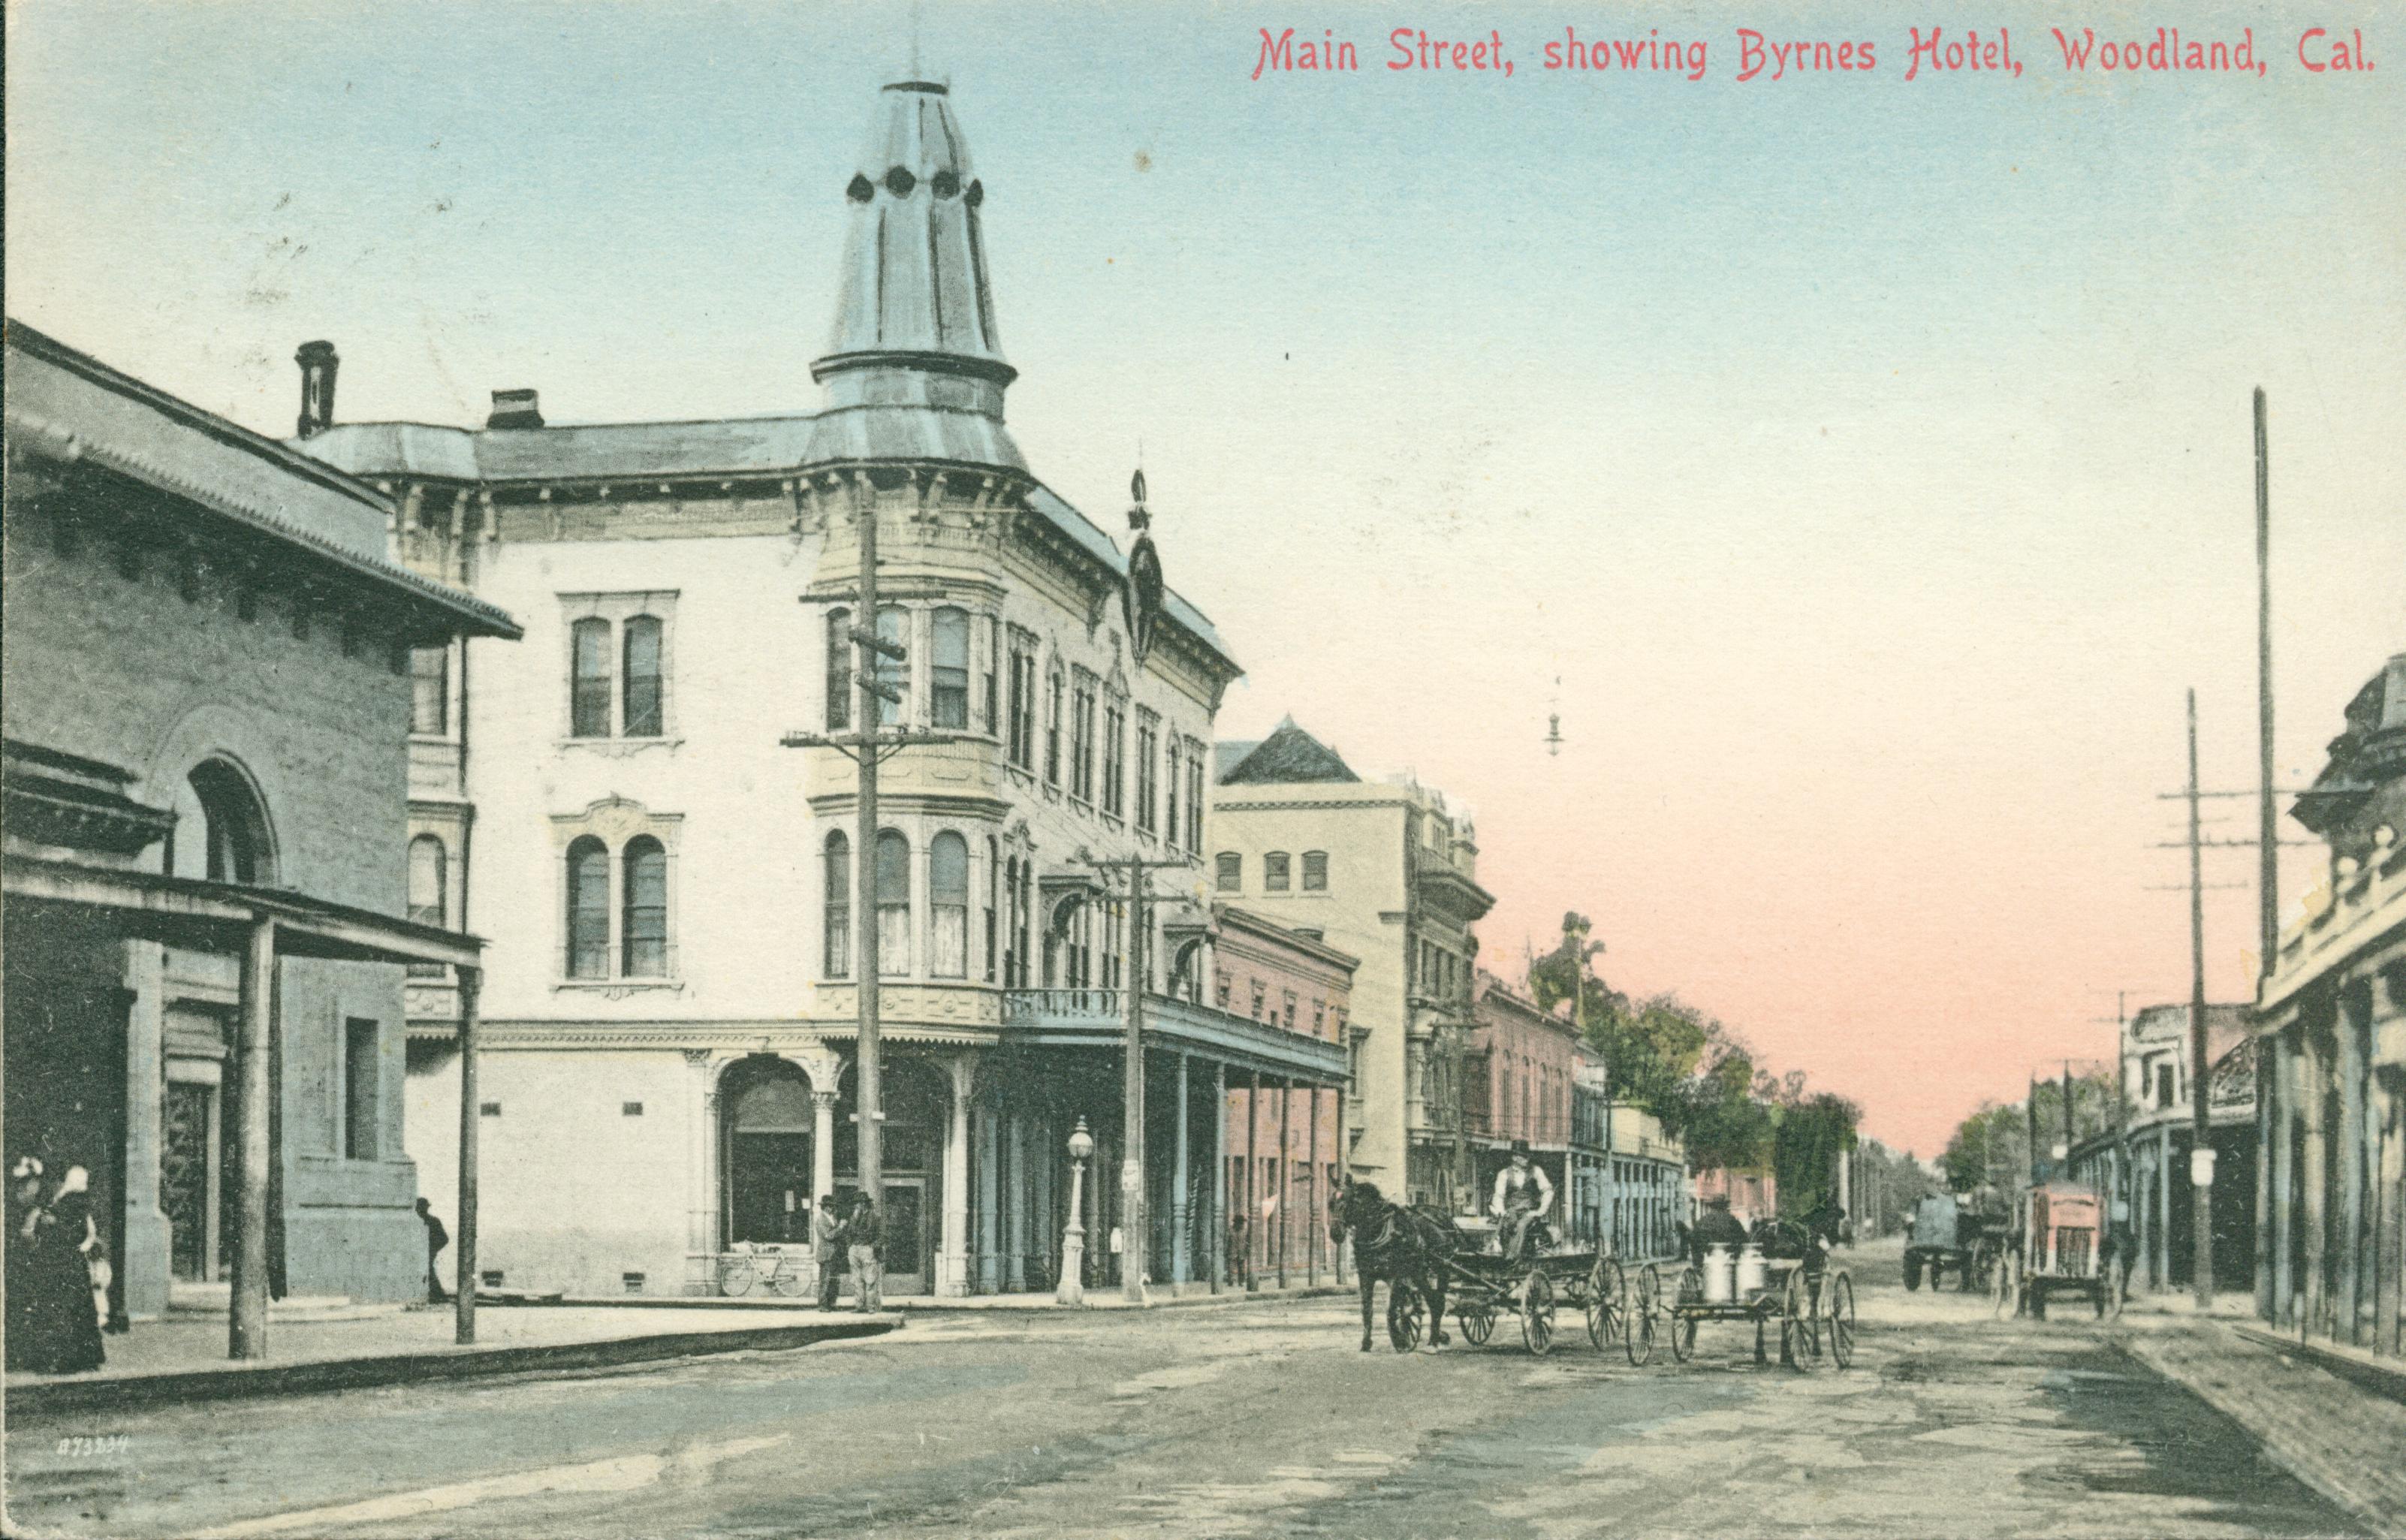 Shows Main Street in Woodland with the Byrnes Hotel on the left